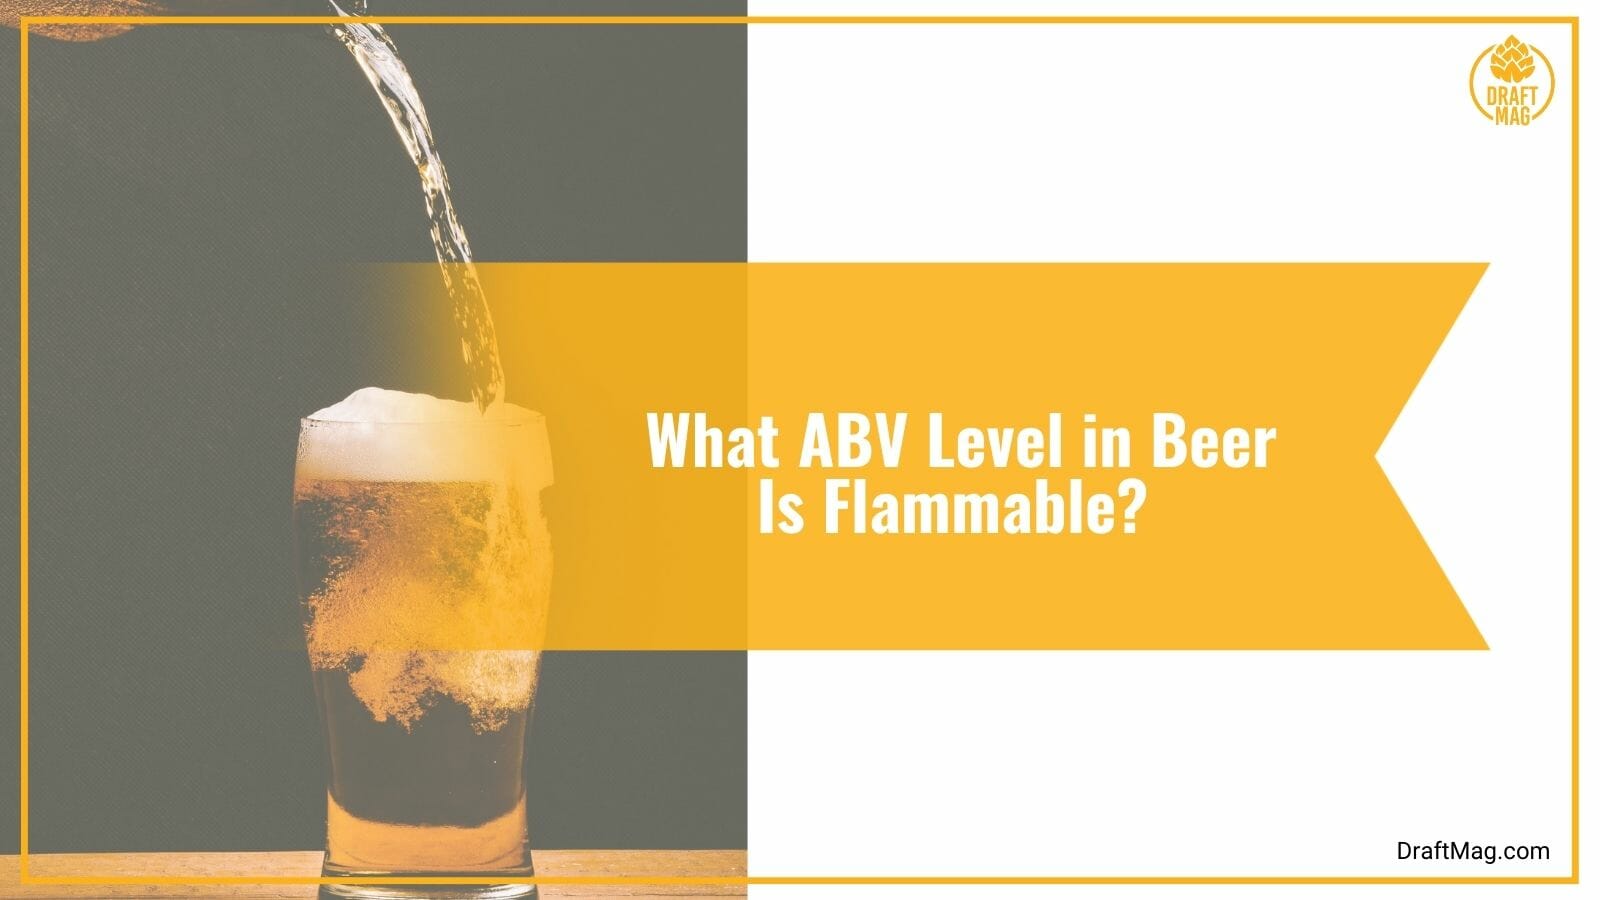 What ABV Level in Beer Is Flammable